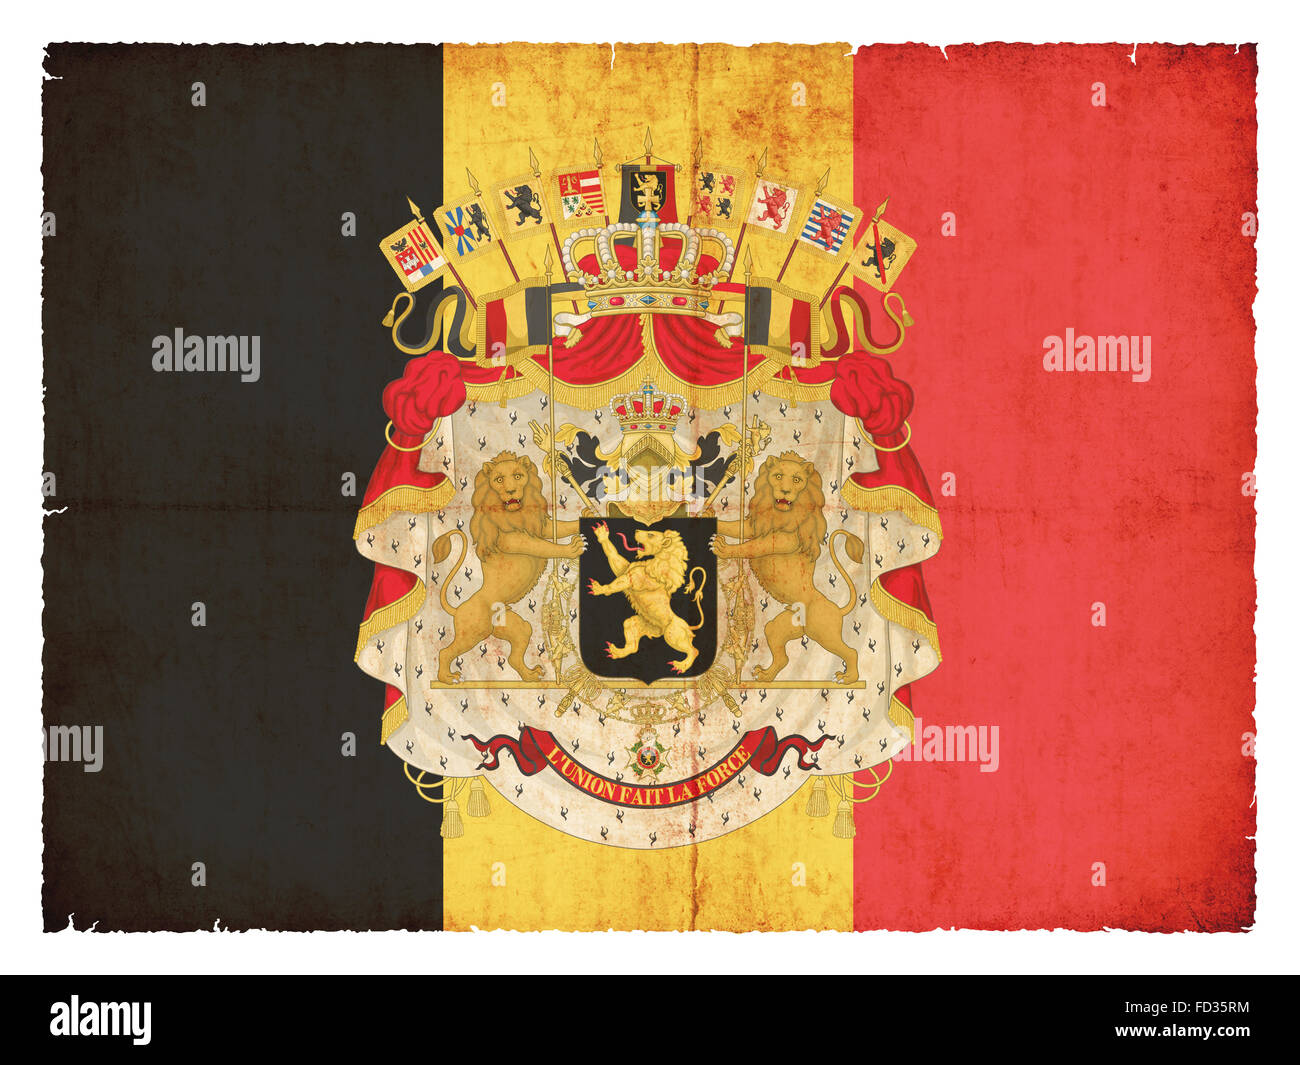 National Flag of Belgium coat of arms created in grunge style Stock Photo